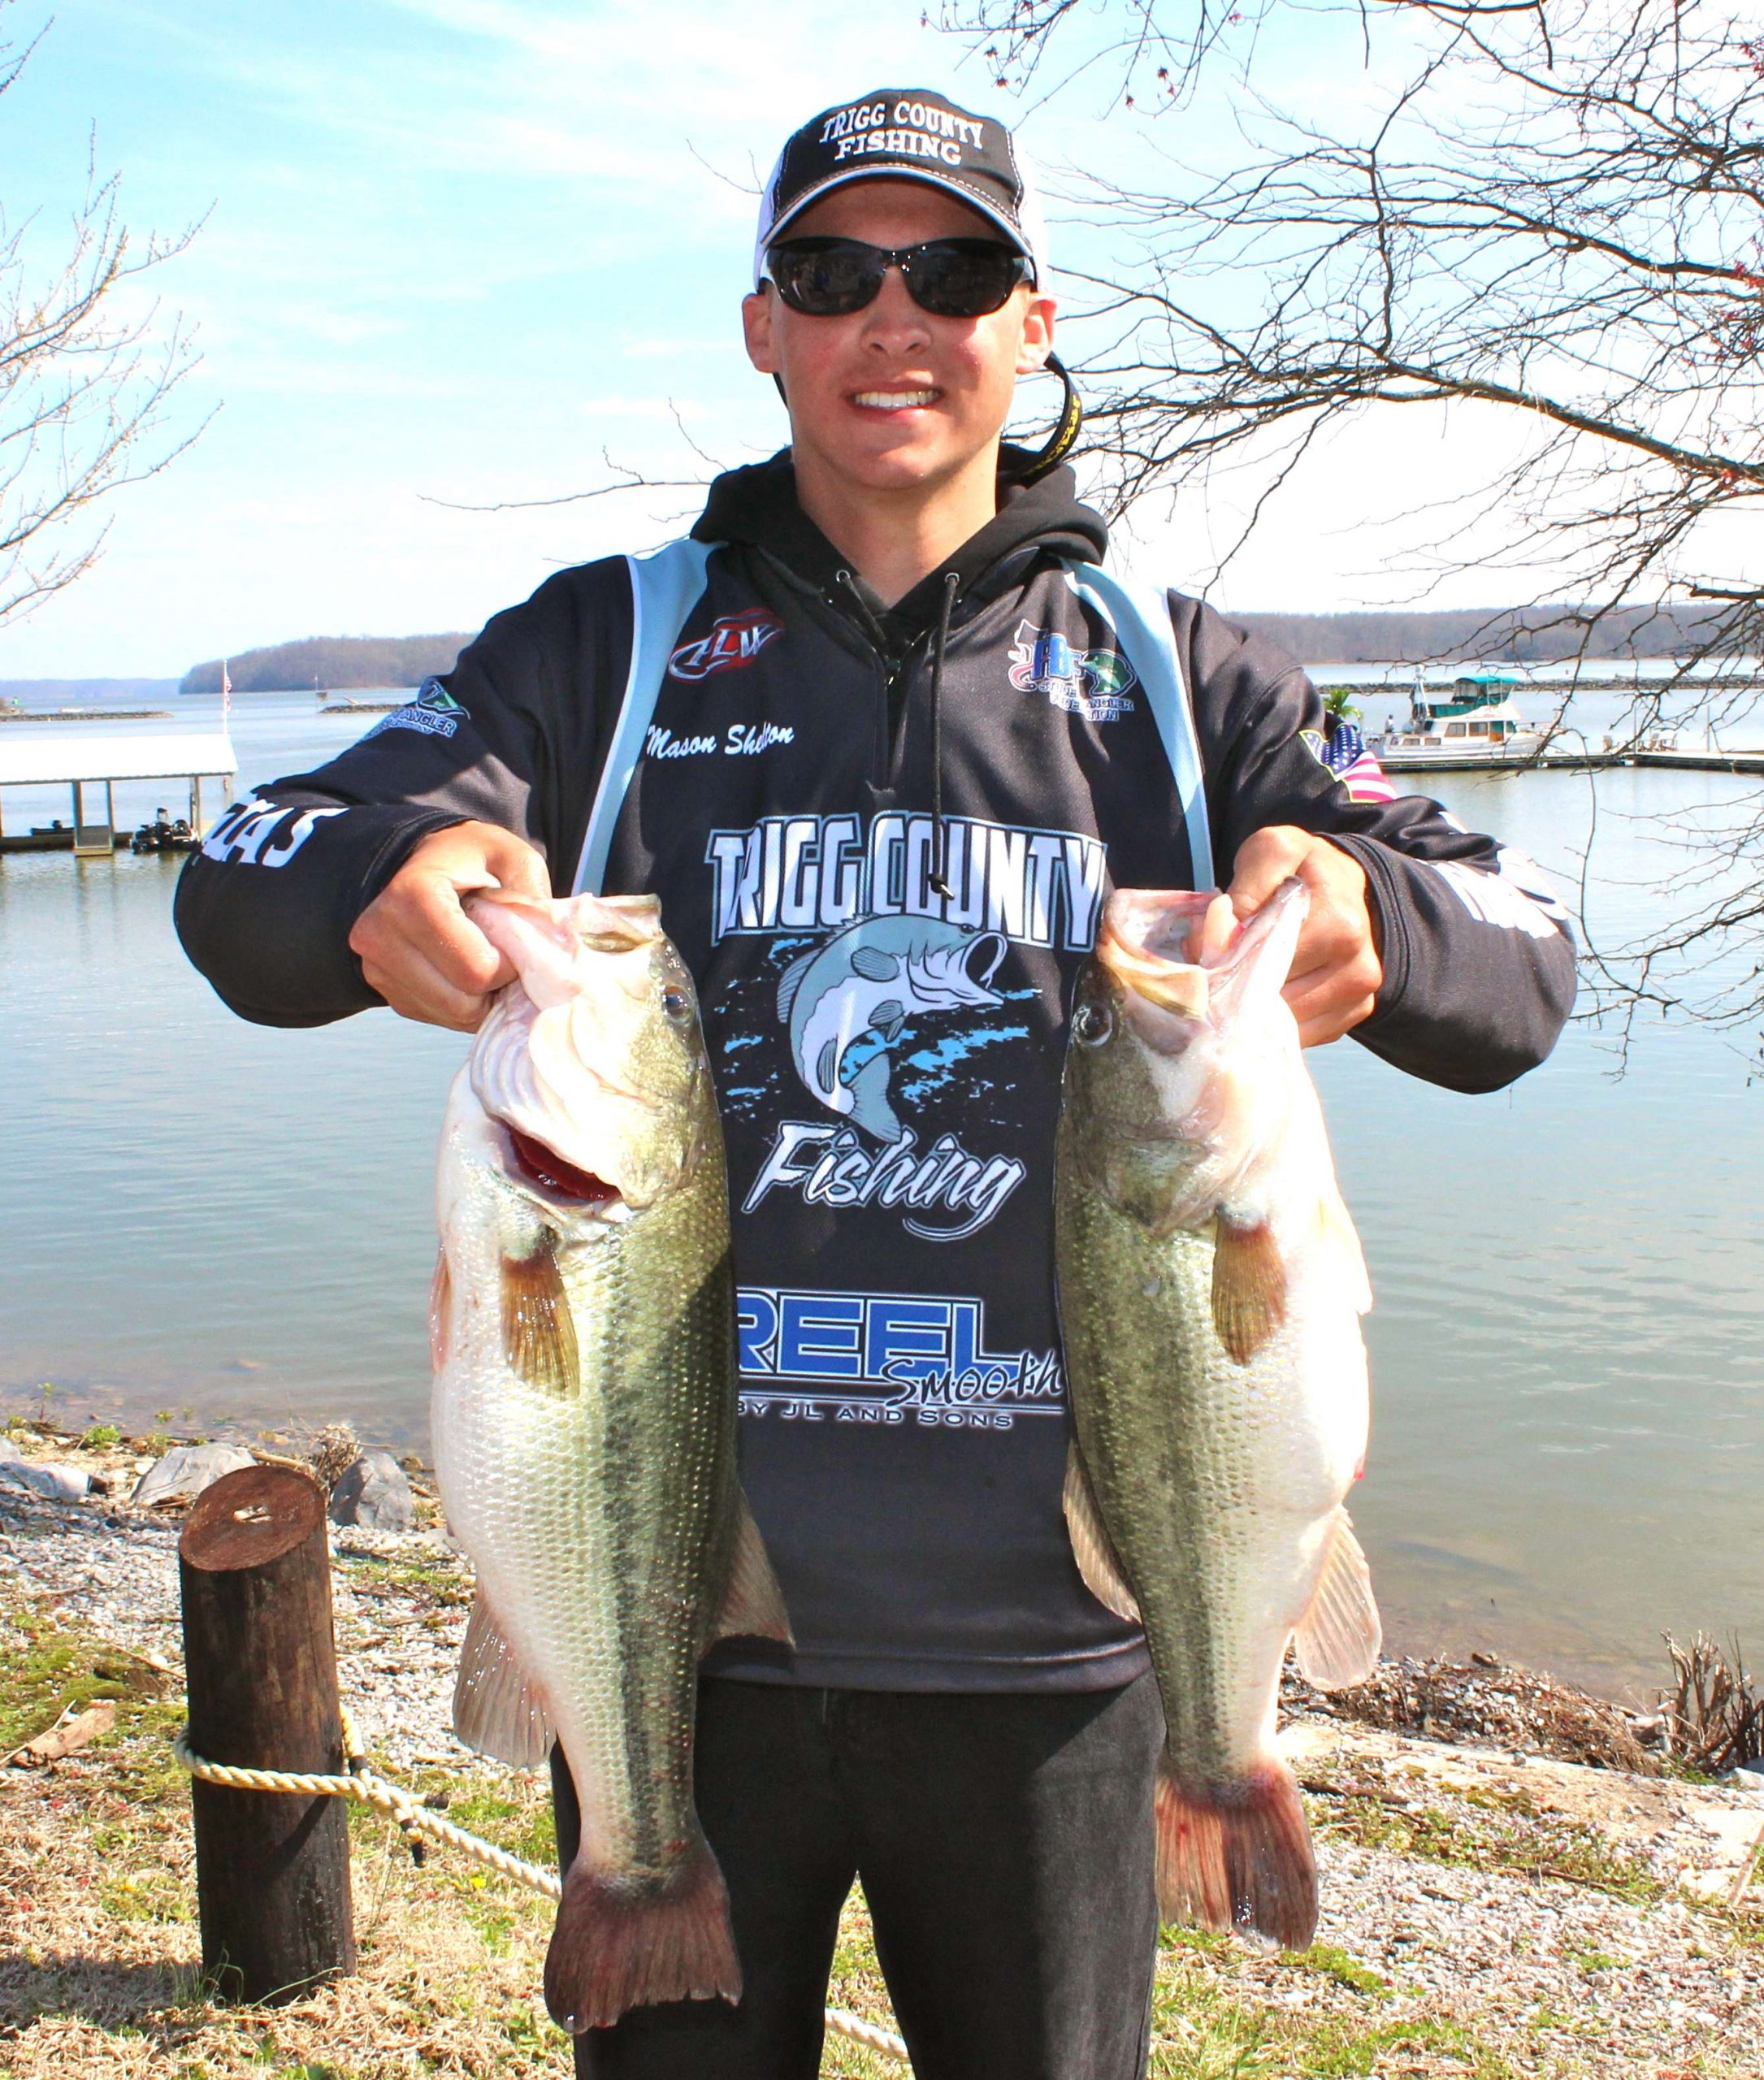 <p>Kentucky: Mason Shelton</p>
<p>
Shelton, a junior at Trigg County High School, posted a runner-up finish in last year's KHSAA State Championship on Kentucky Lake. He also competes in the Fellowship of Christian Anglers Society. He went on a mission trip to Haiti last year to help build schools for children, and he is going back in 2015.